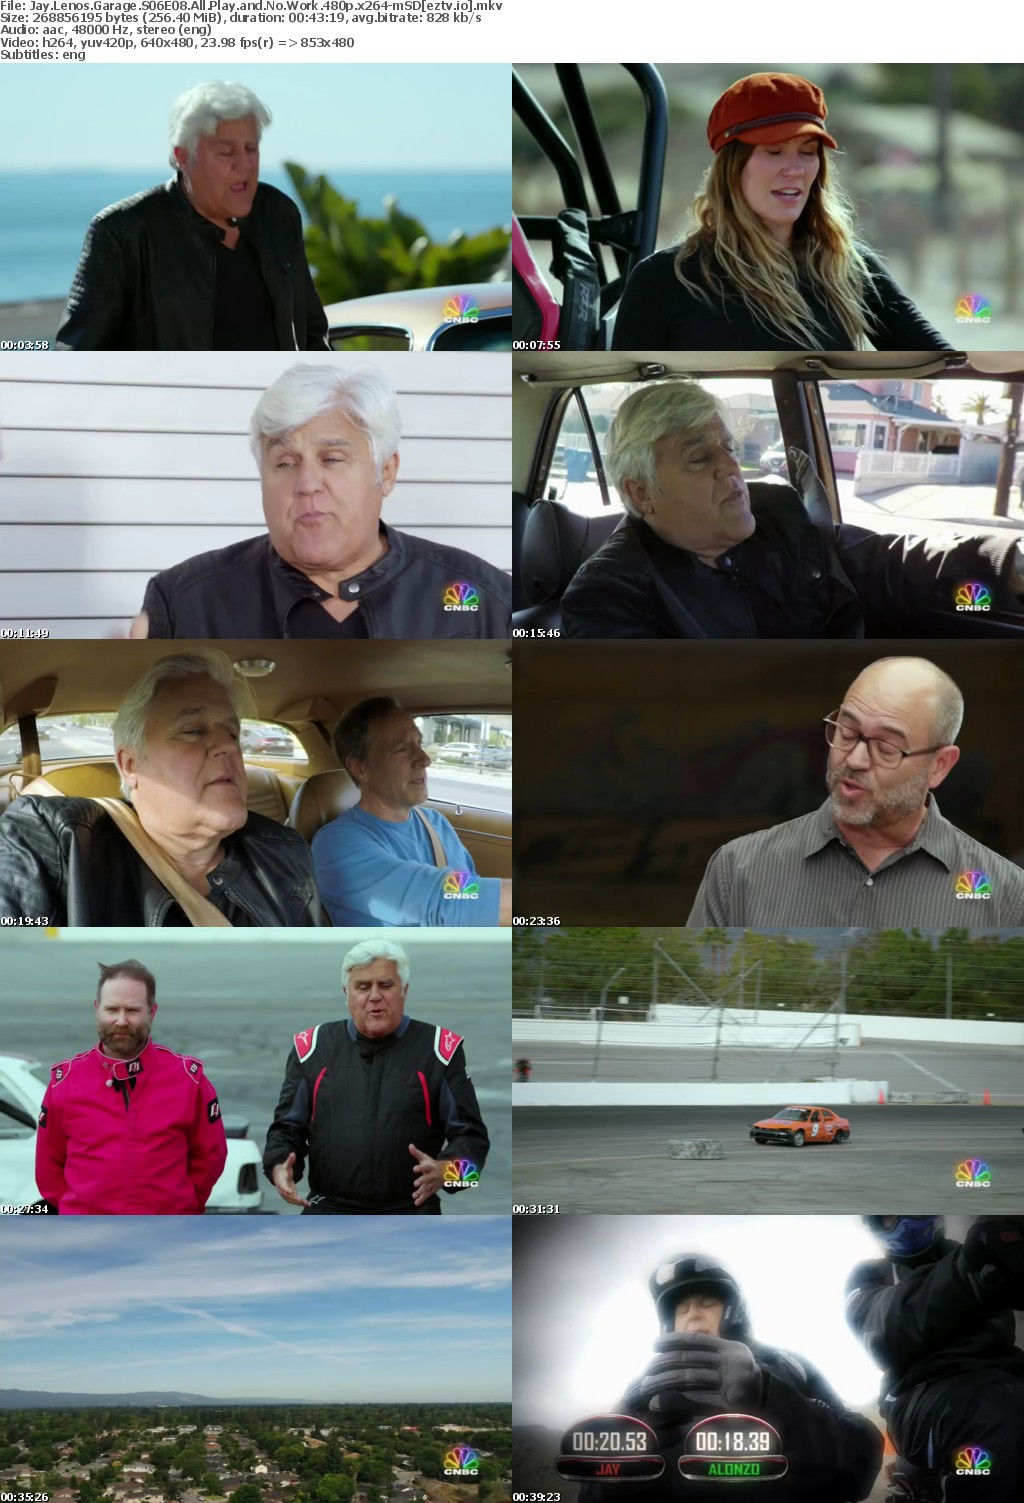 Jay Lenos Garage S06E08 All Play and No Work 480p x264-mSD